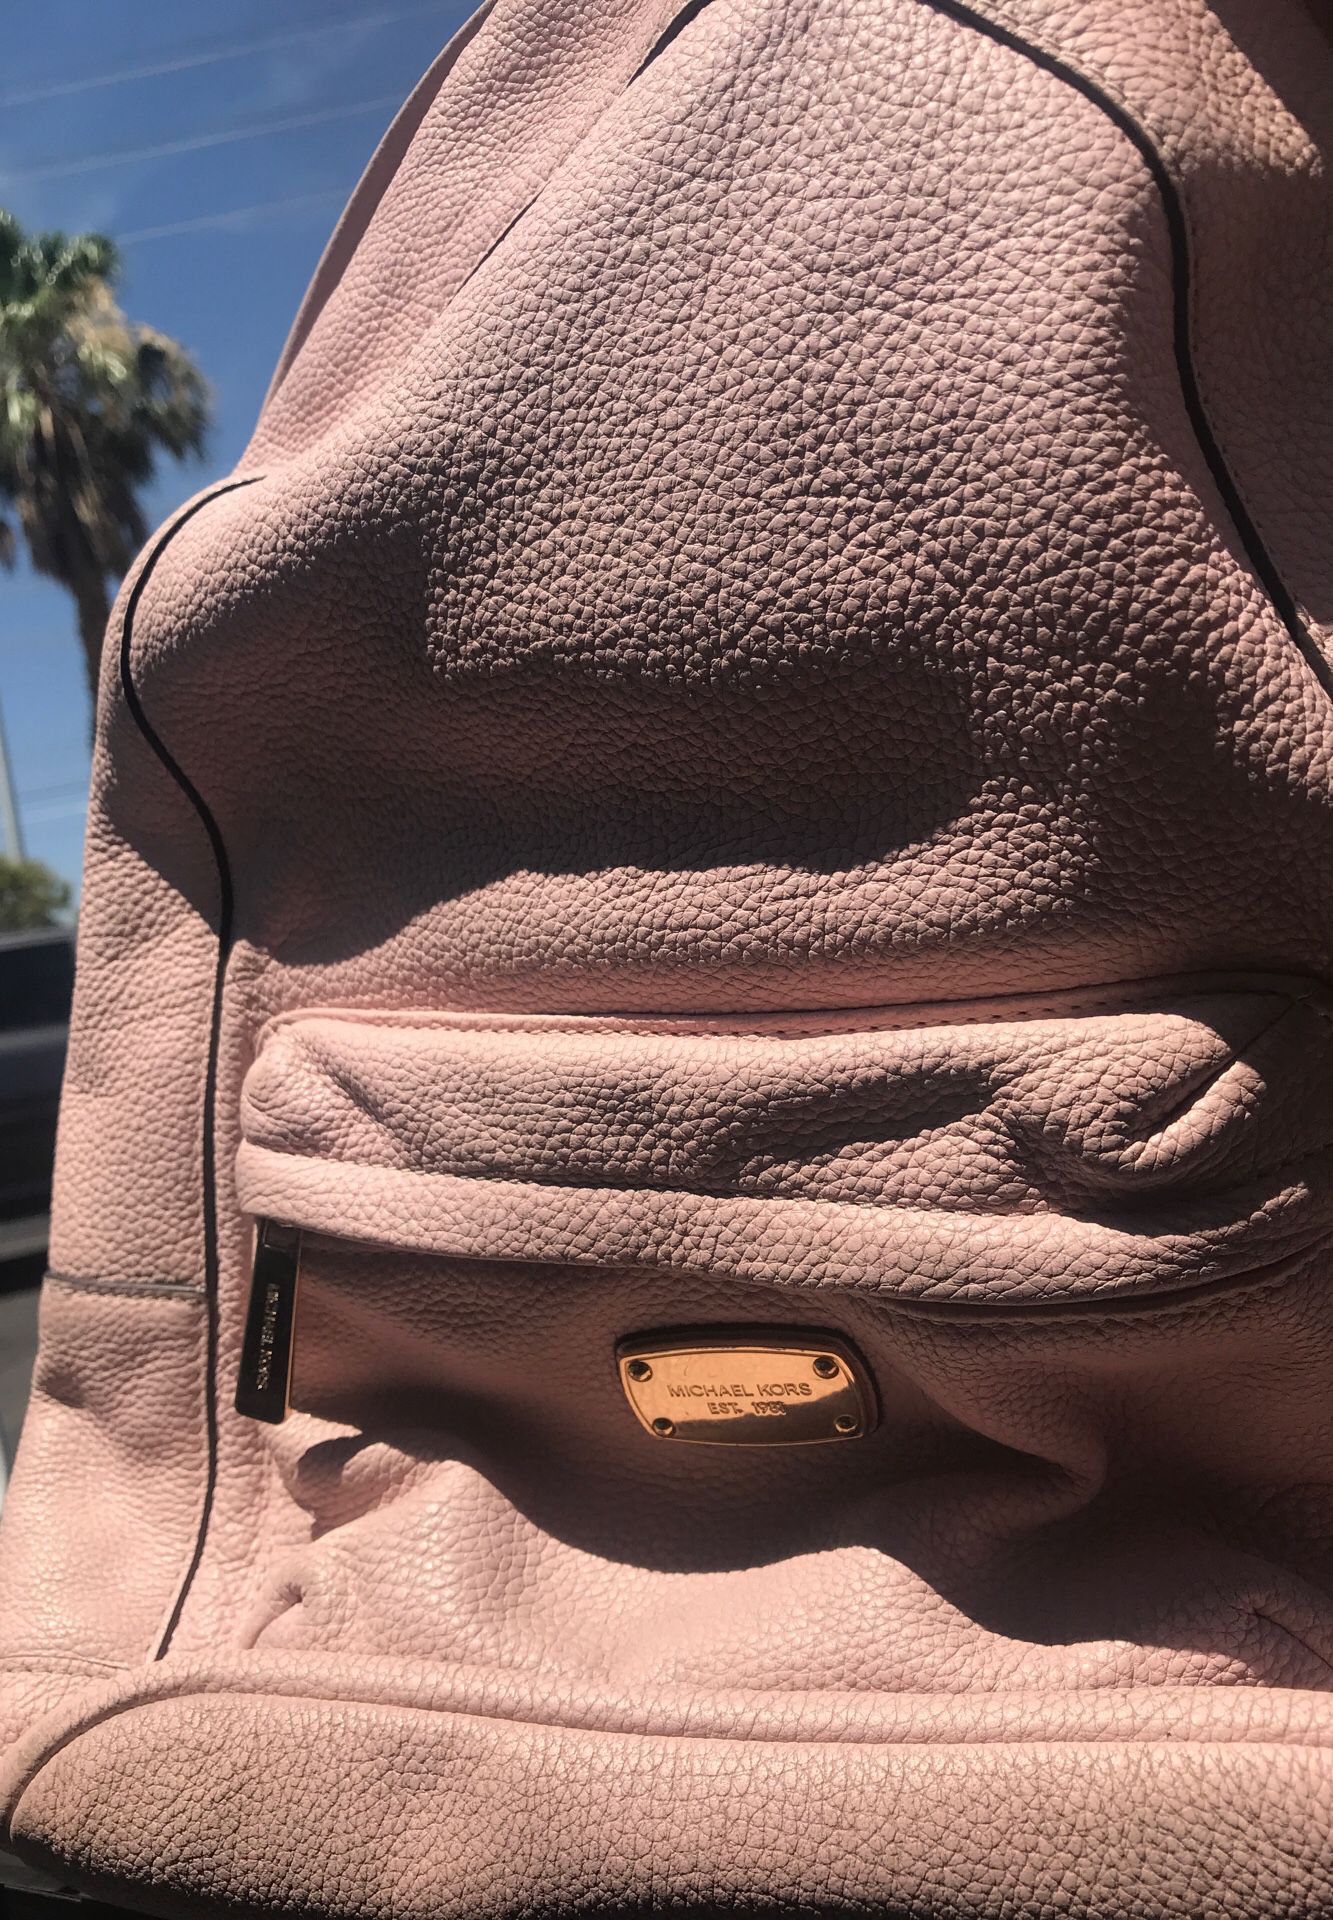 MICHAEL KORS baby pink backpack only $60! Originally $205